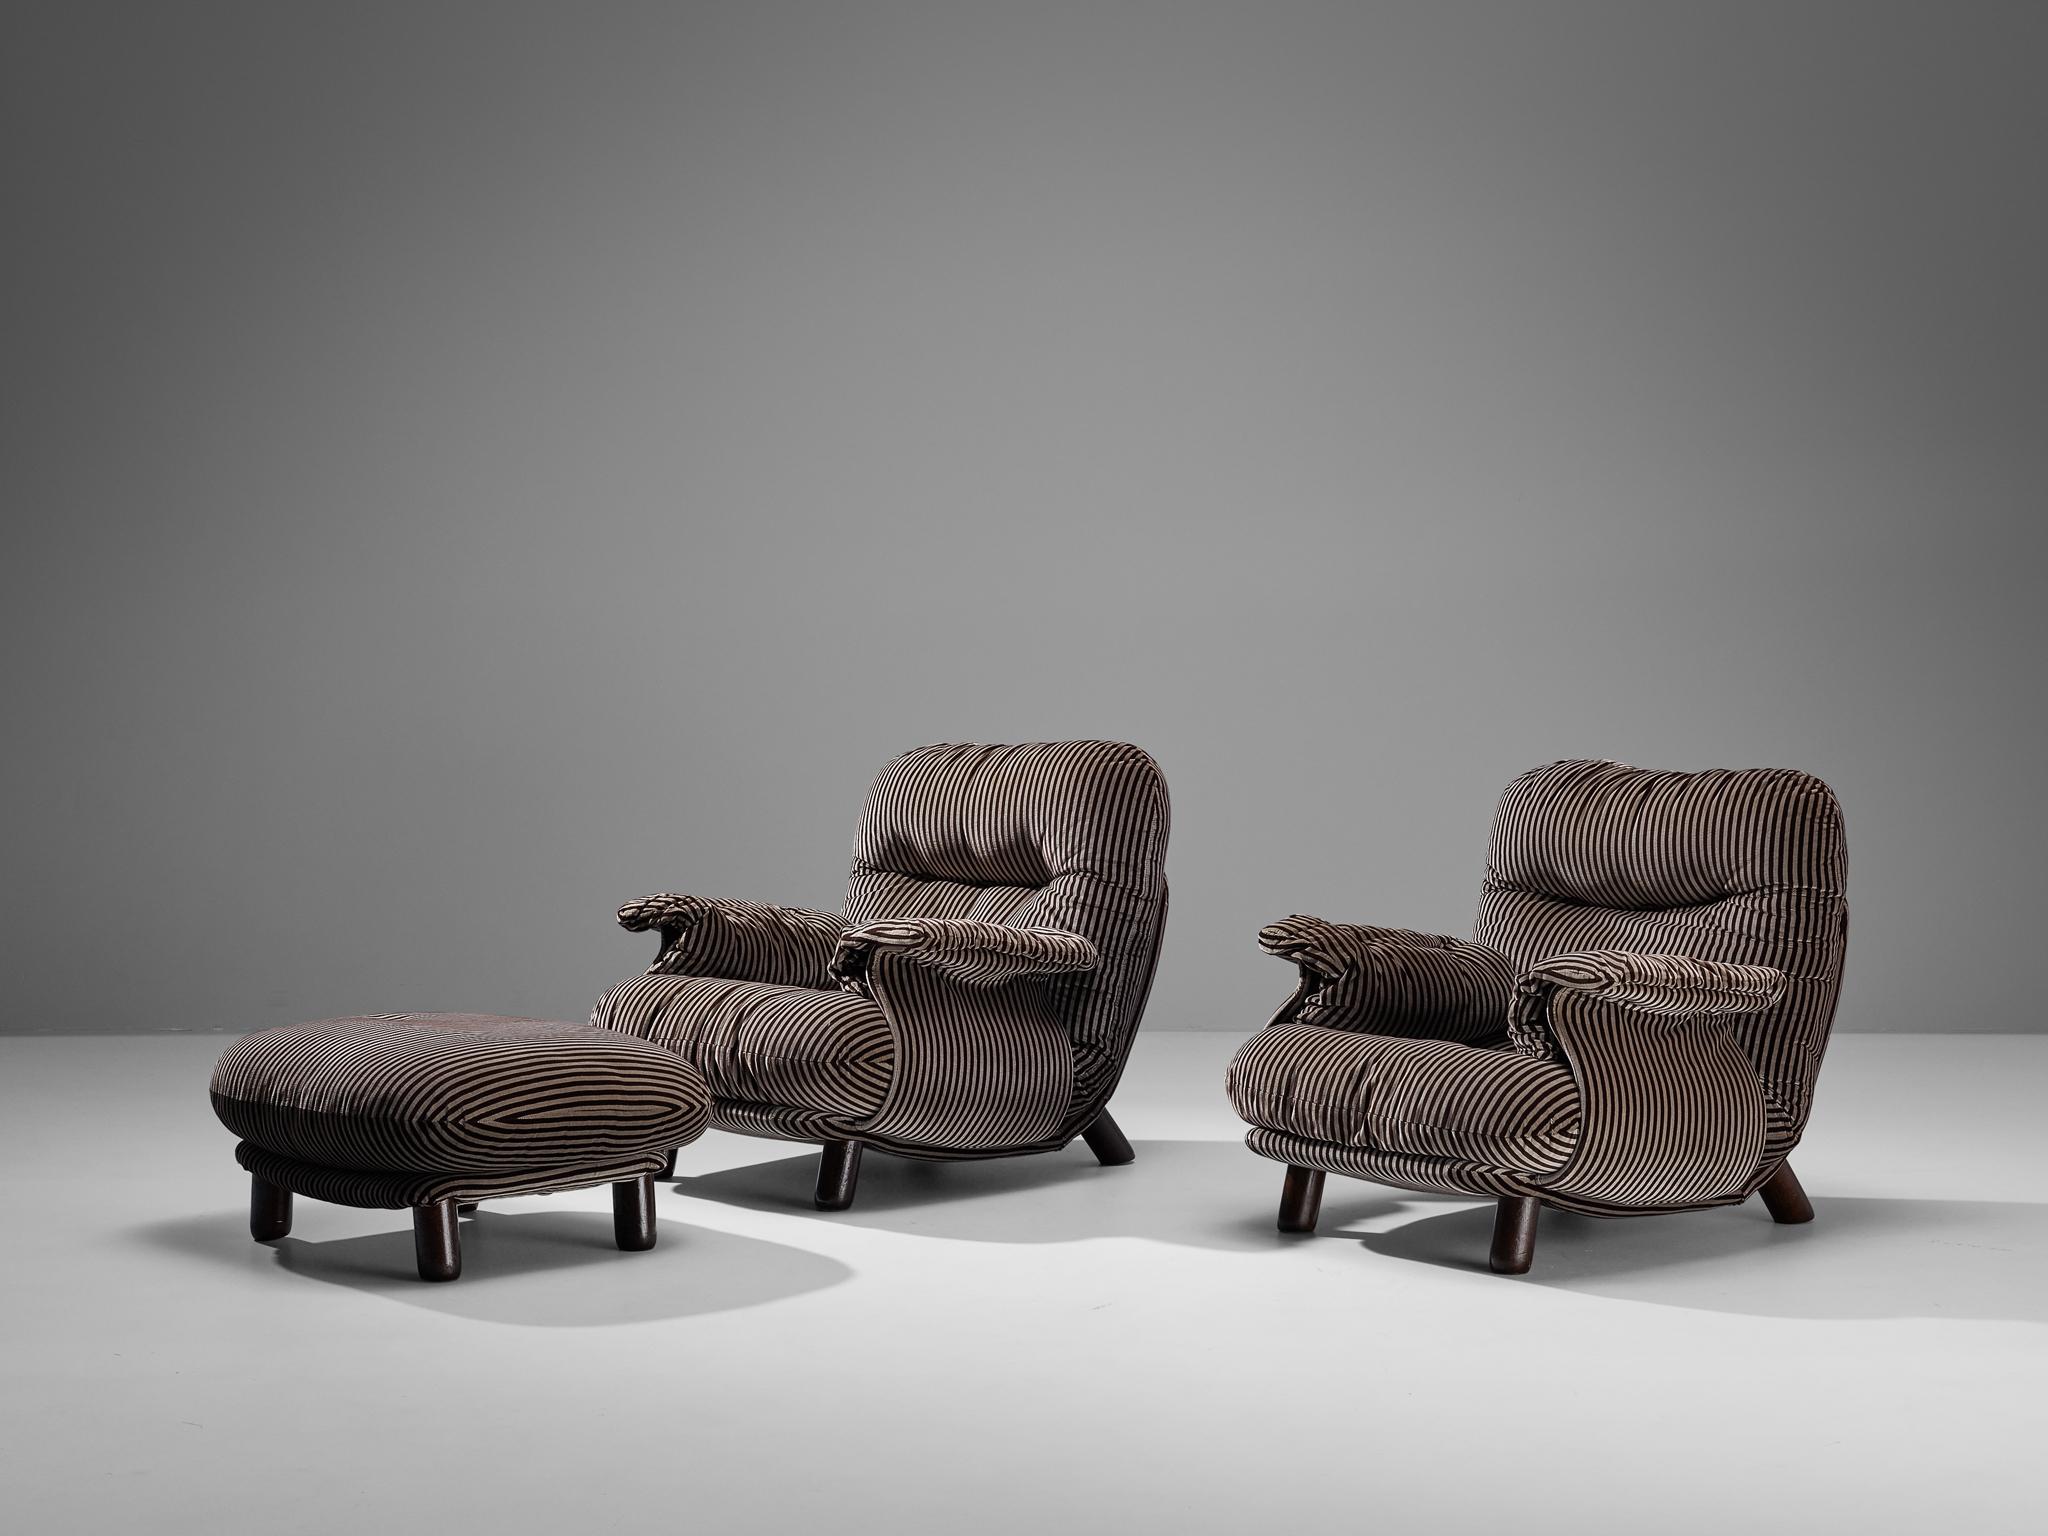 E. Cobianchi for Insa, pair of lounge chairs with ottoman, fabric, stained wood, Italy, 1970s

An Italian set of two bulky lounge chairs and ottoman designed by E. Cobianchi. The lounge chairs feature thick, tufted seats and backrests. The armrests